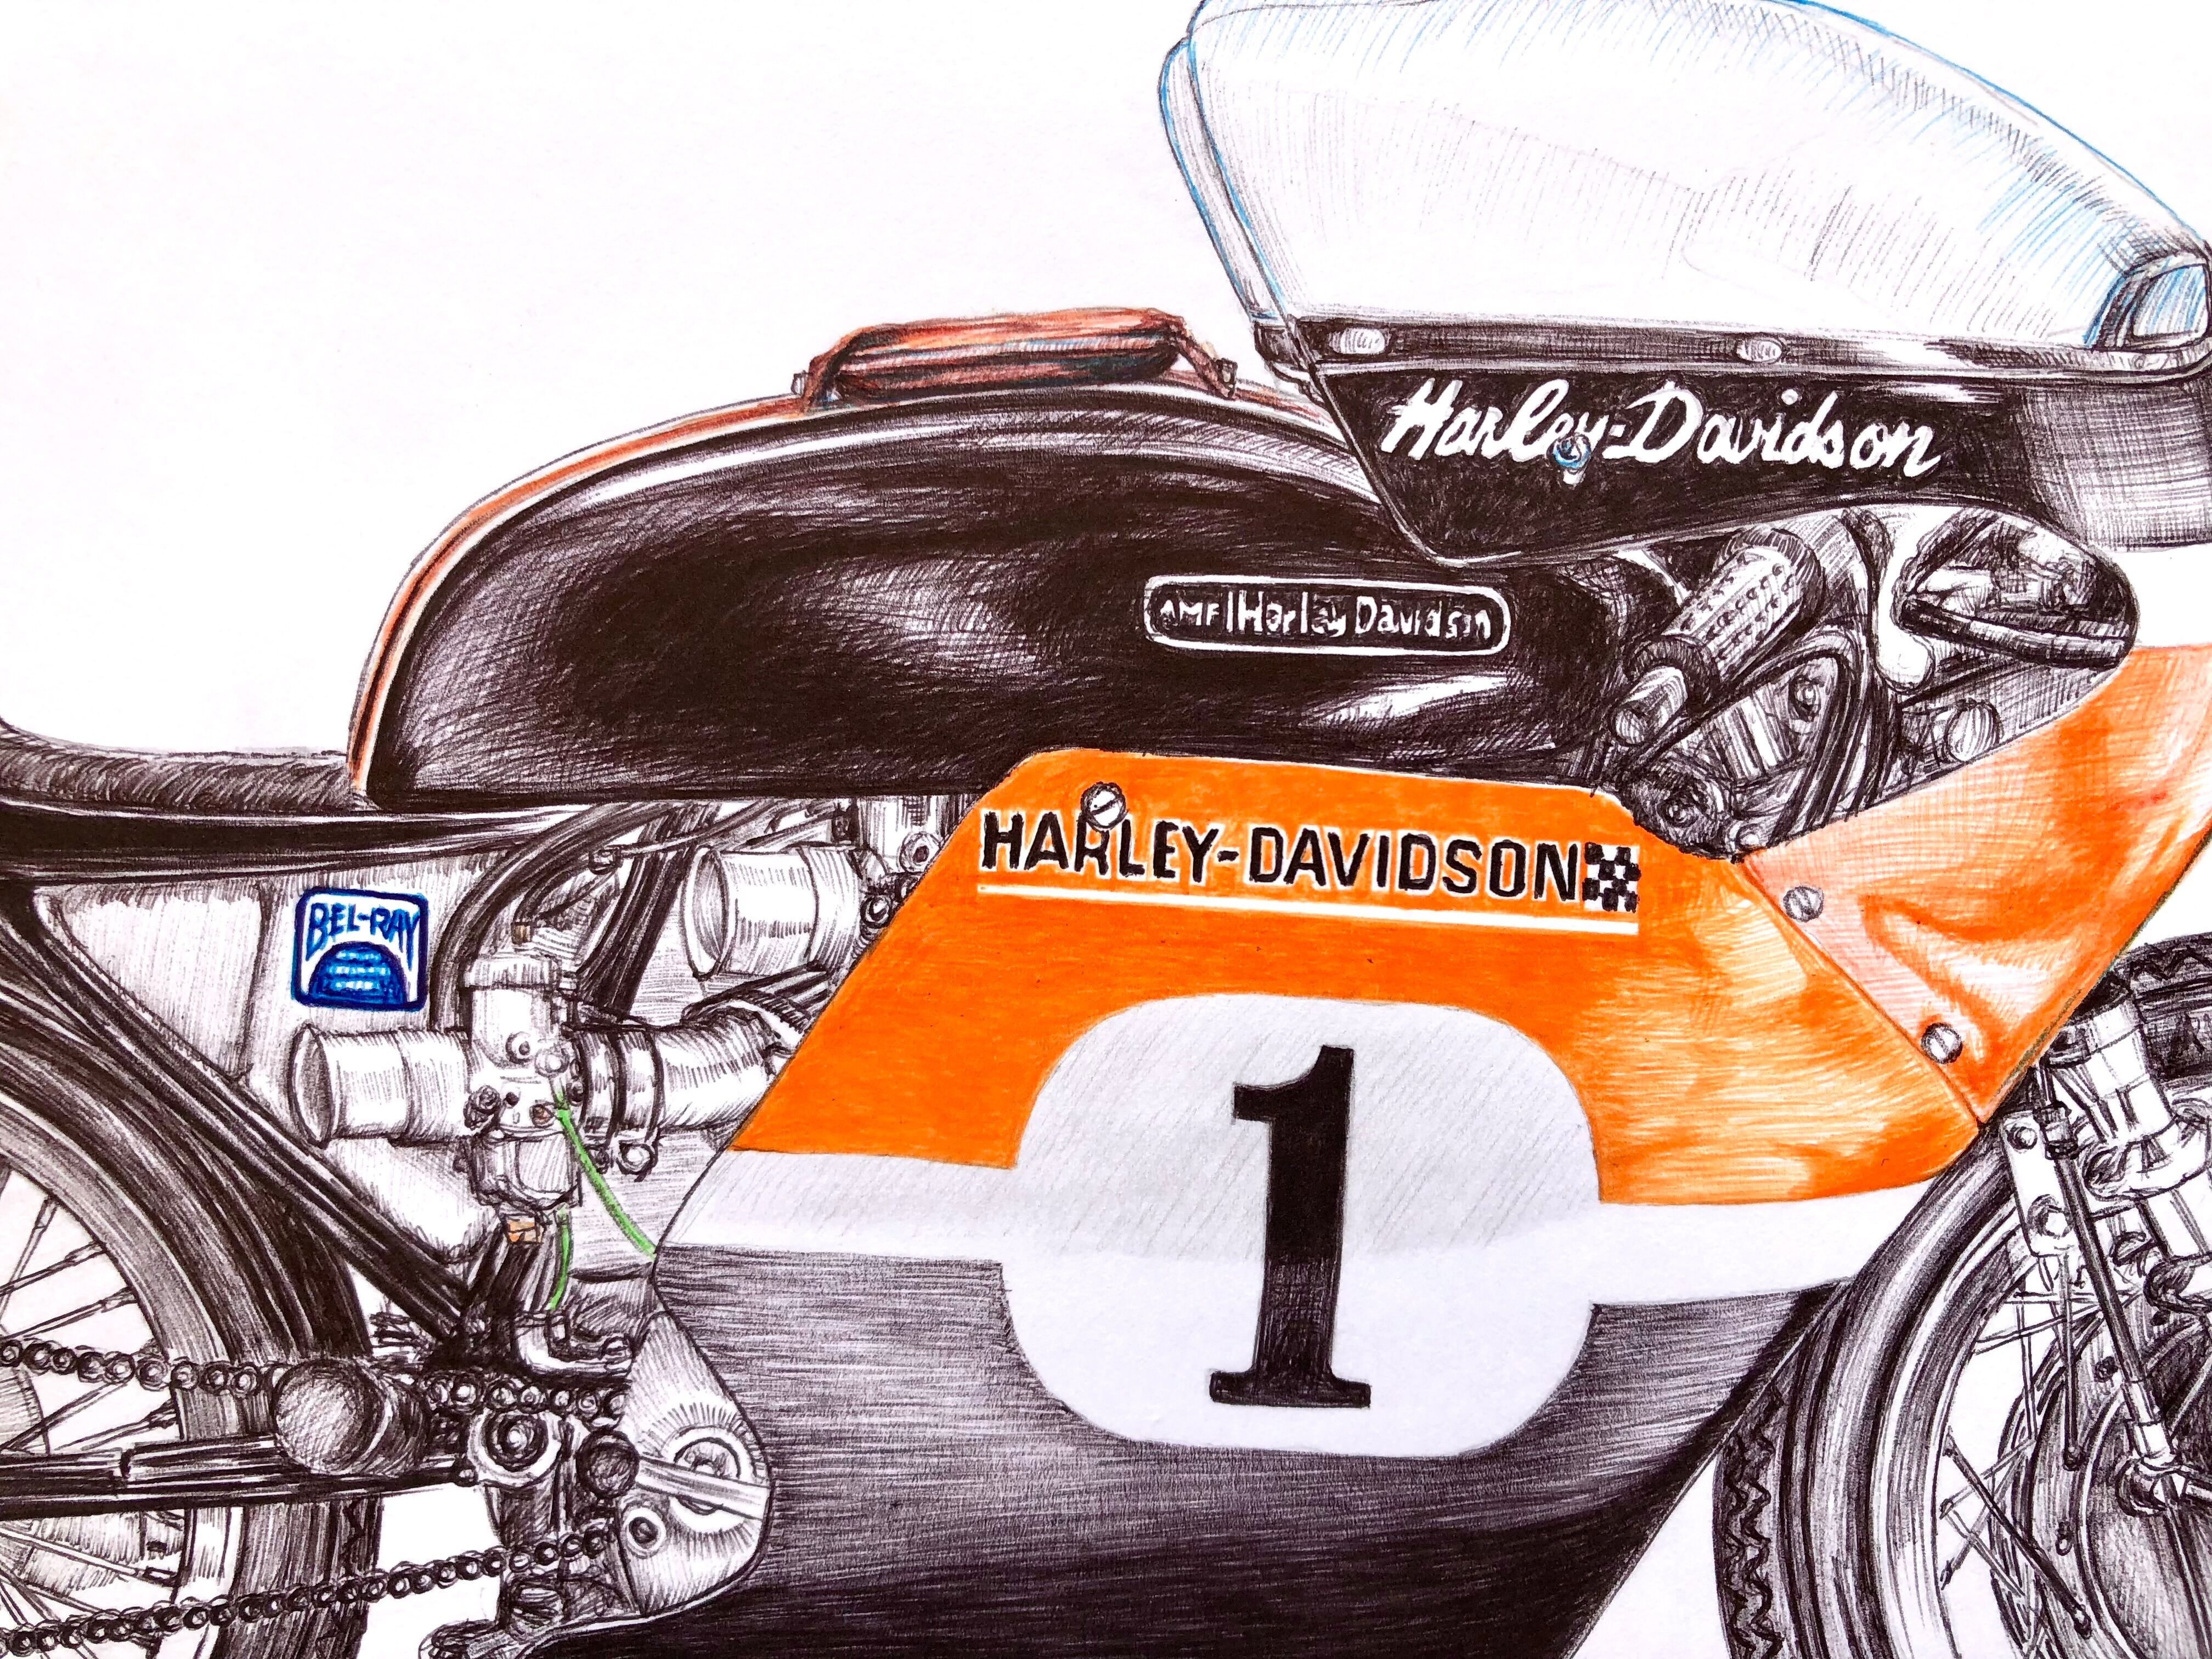 Picture "Motorcycle Harley Davidson XRTT 750 Racer, 1972" (2018)